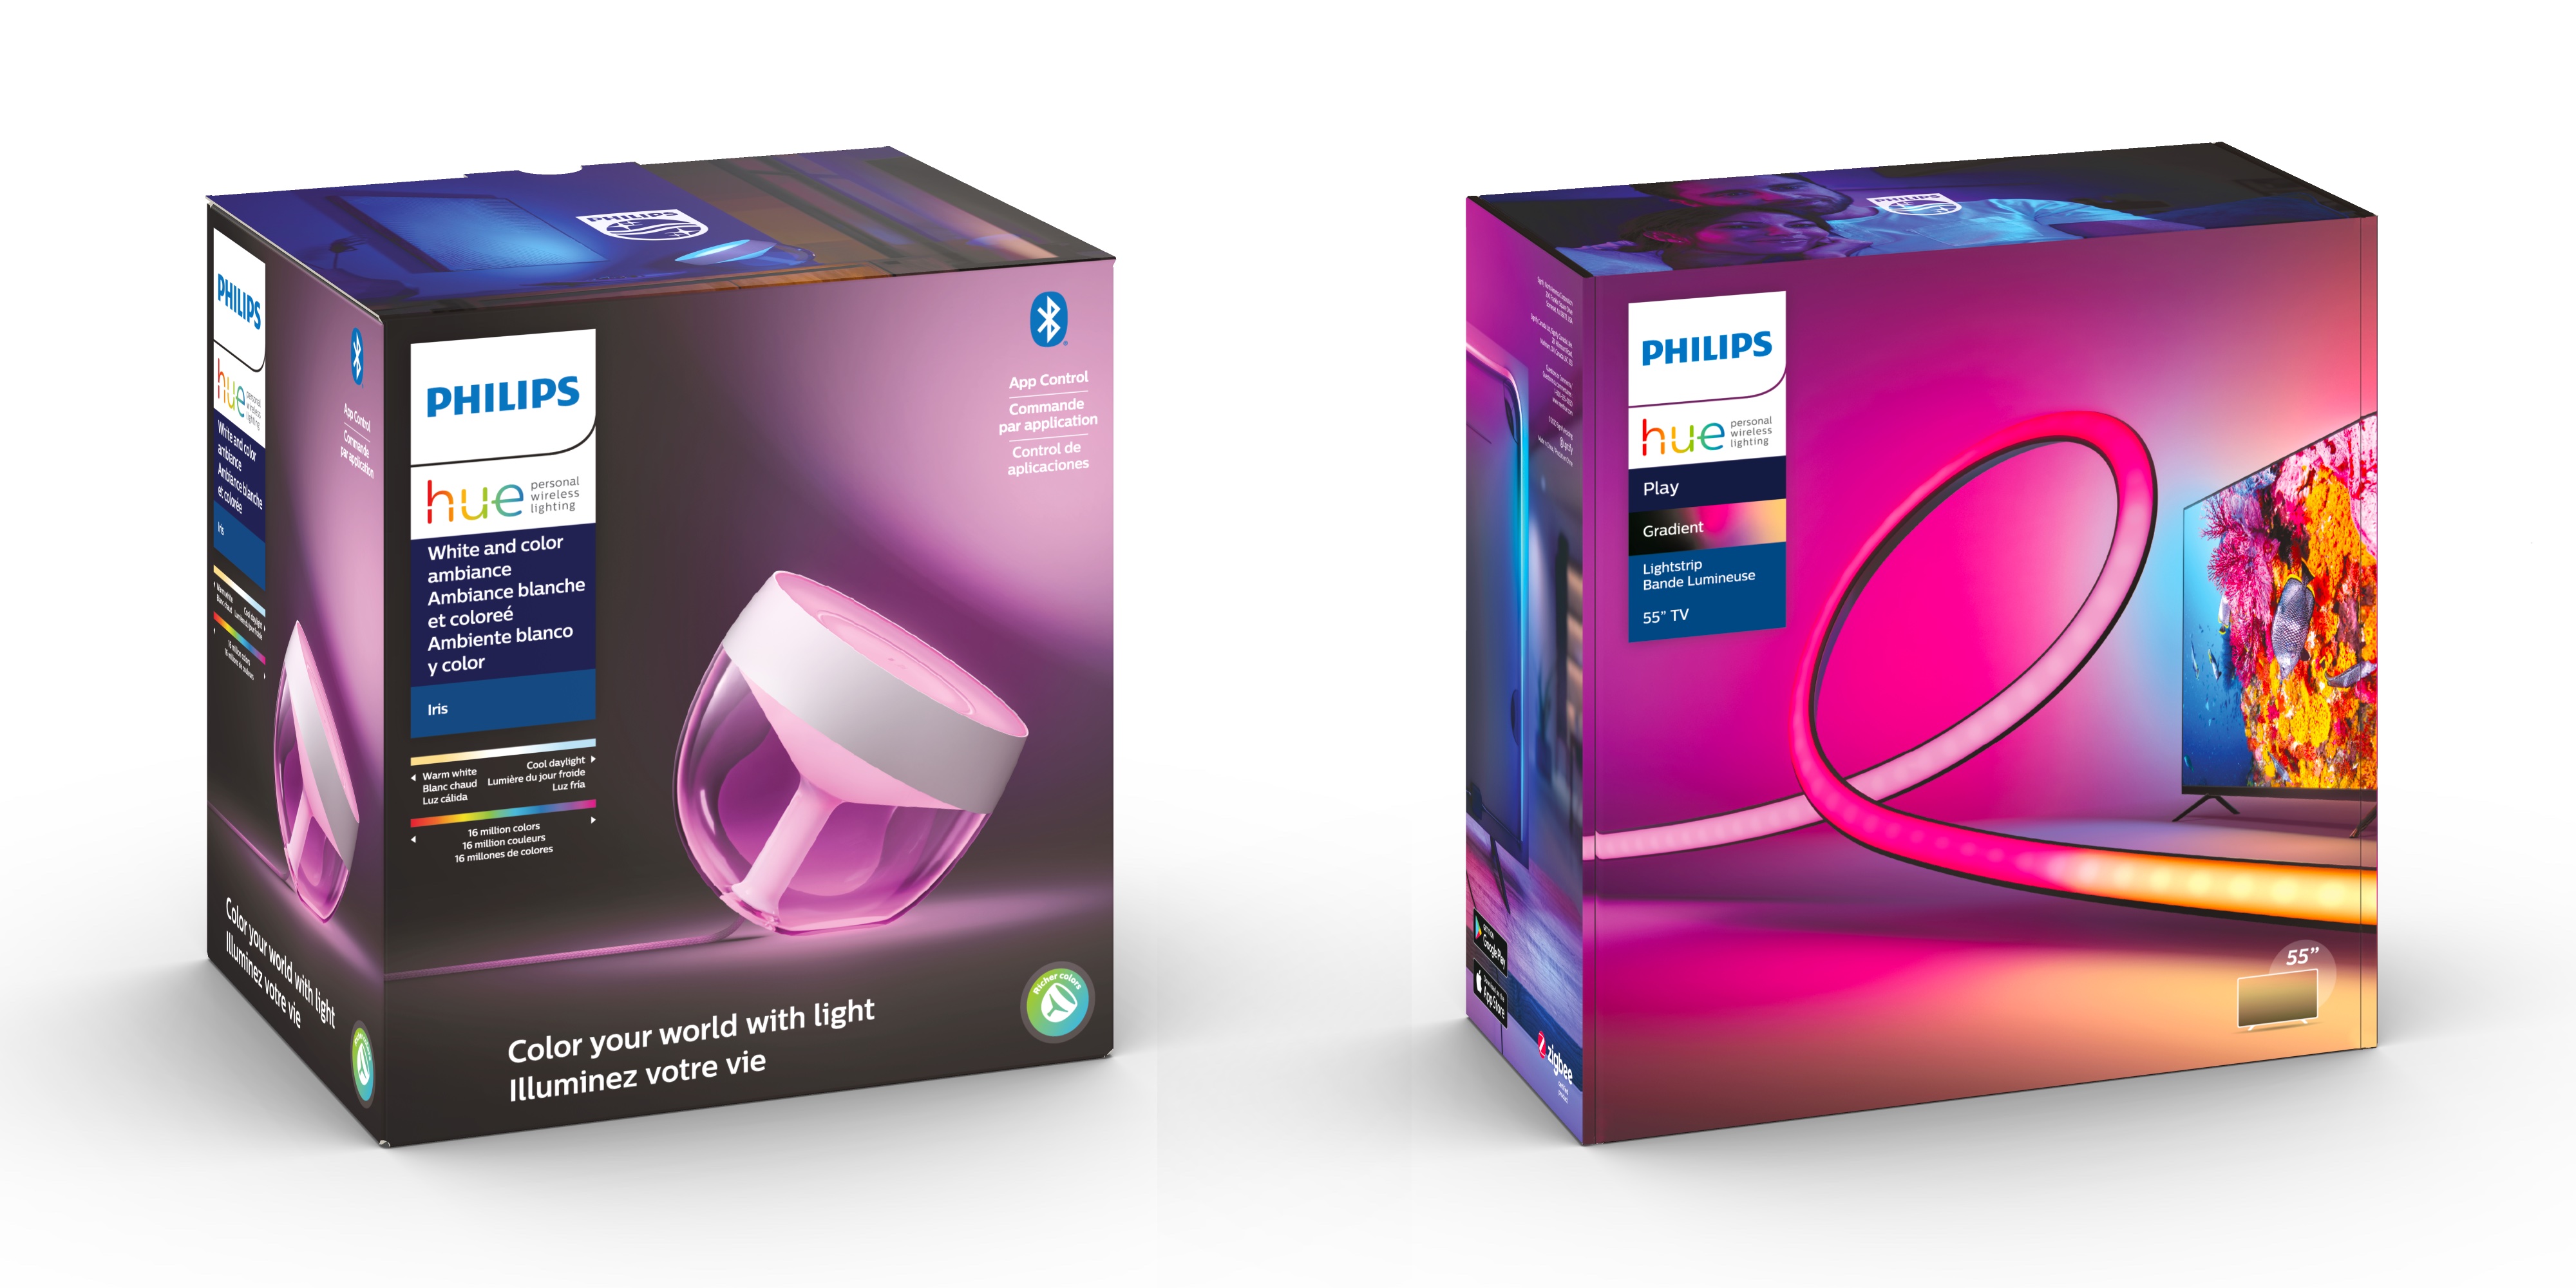 NEW Philips Hue Gradient Lightstrip Ambiance - Fall Product Lineup